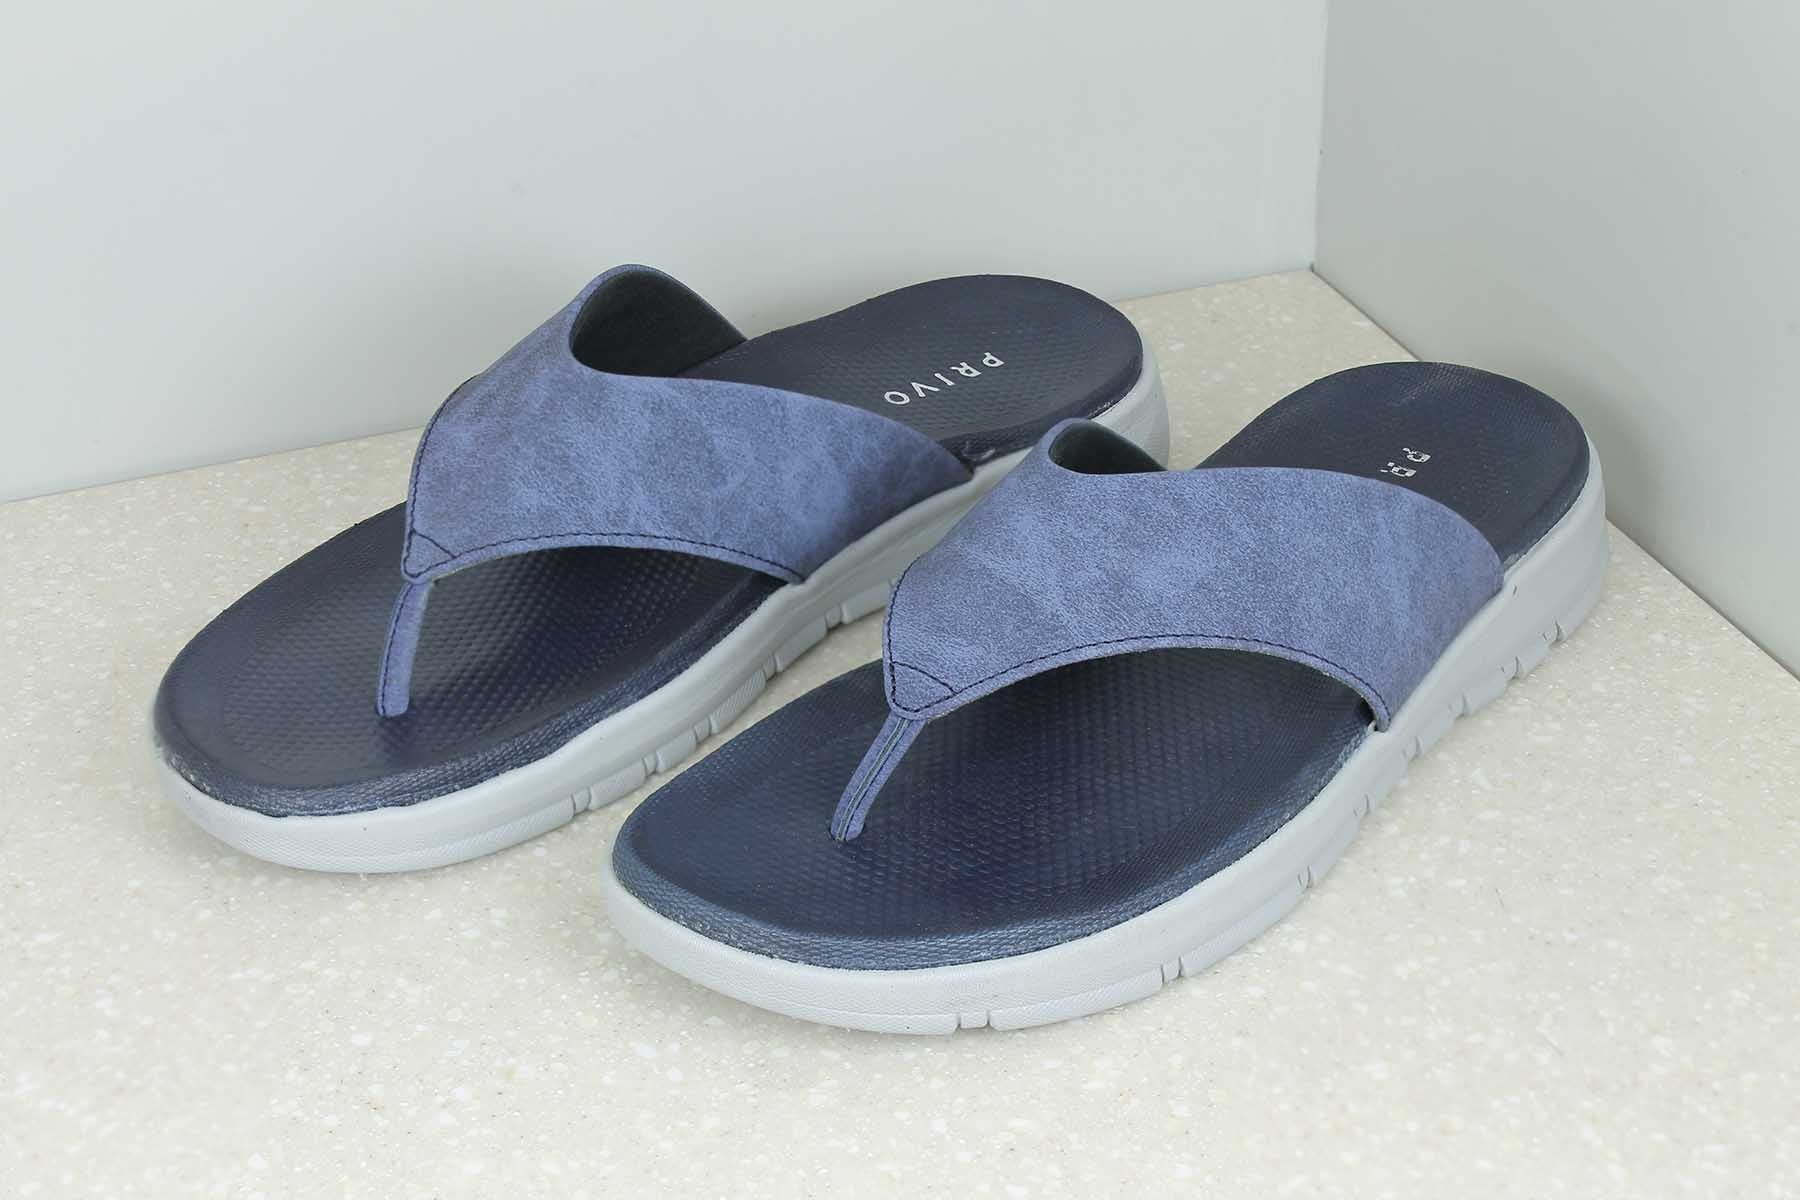 FOLDED THONG - BLUE-Men's Slippers-Inc5 Shoes